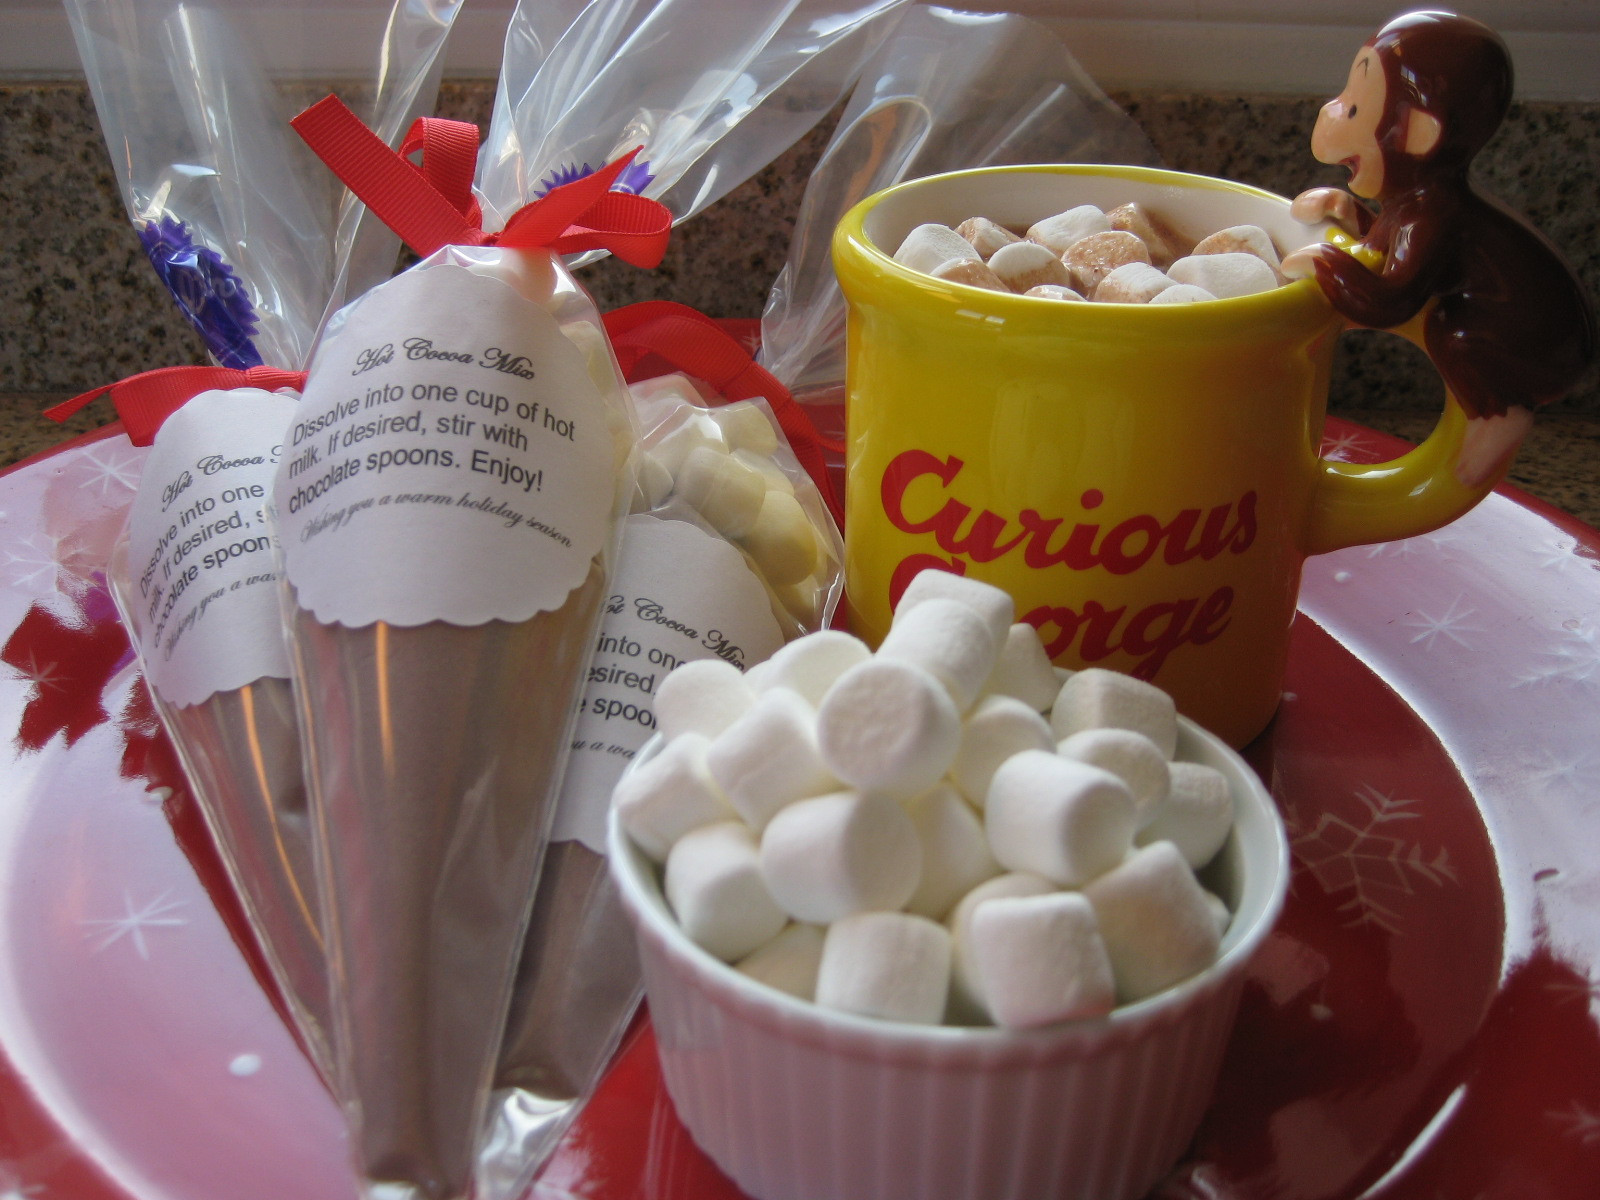 Top 10 Chocolate Gift Basket Ideas
 Hot Cocoa Mix